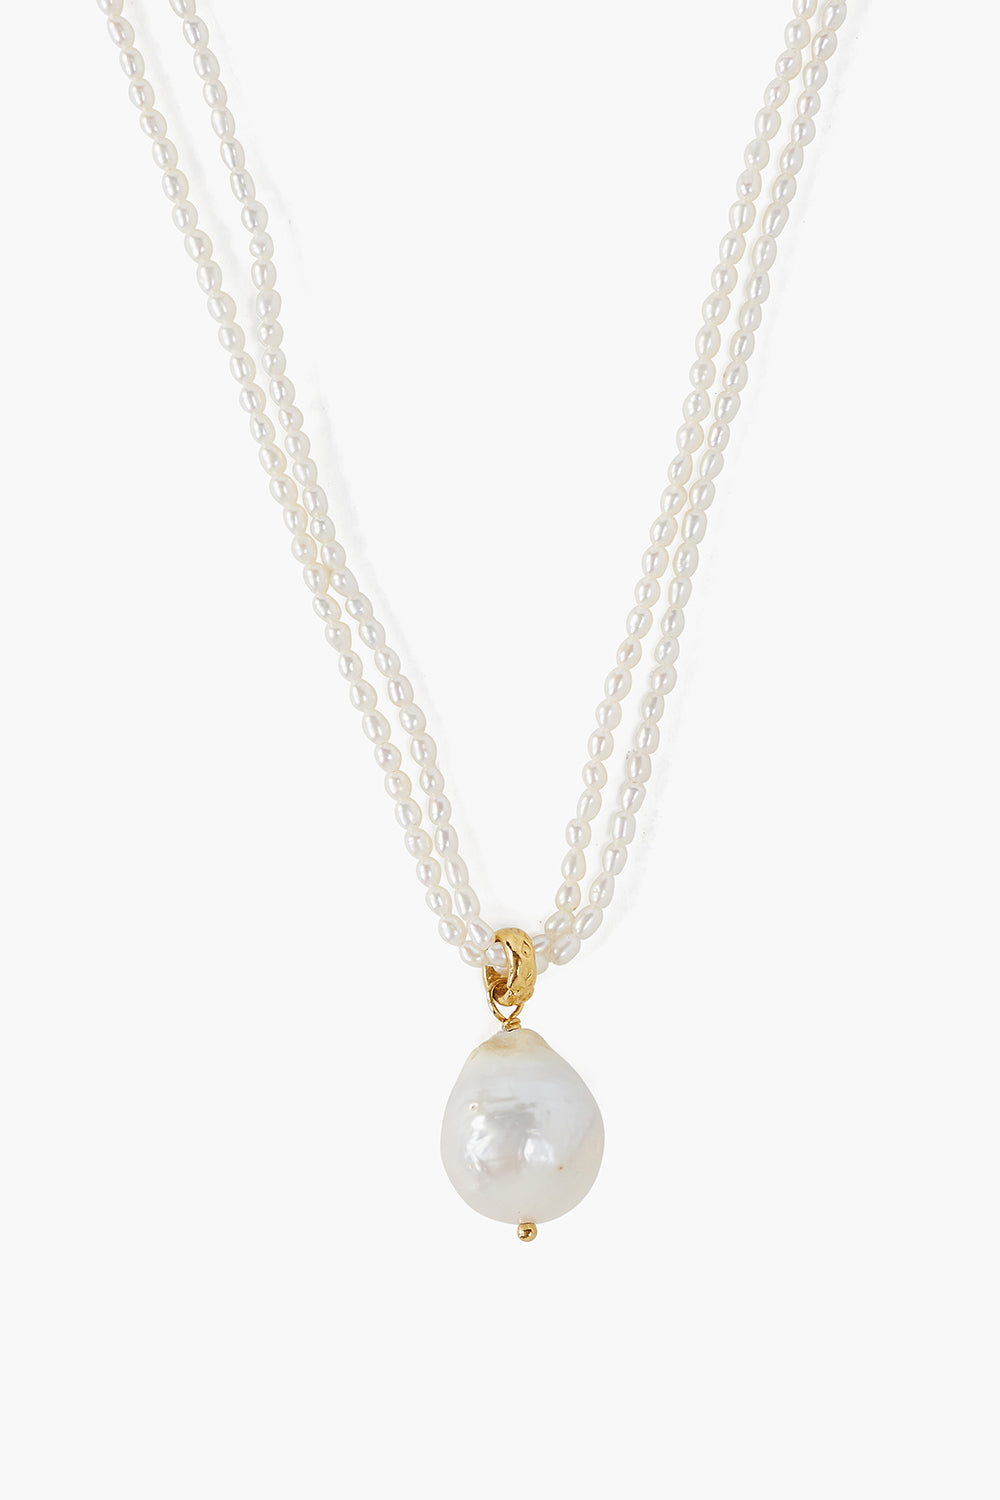 WHITE FRESHWATER PEARL ADJUSTABLE NECKLACE - Kingfisher Road - Online Boutique